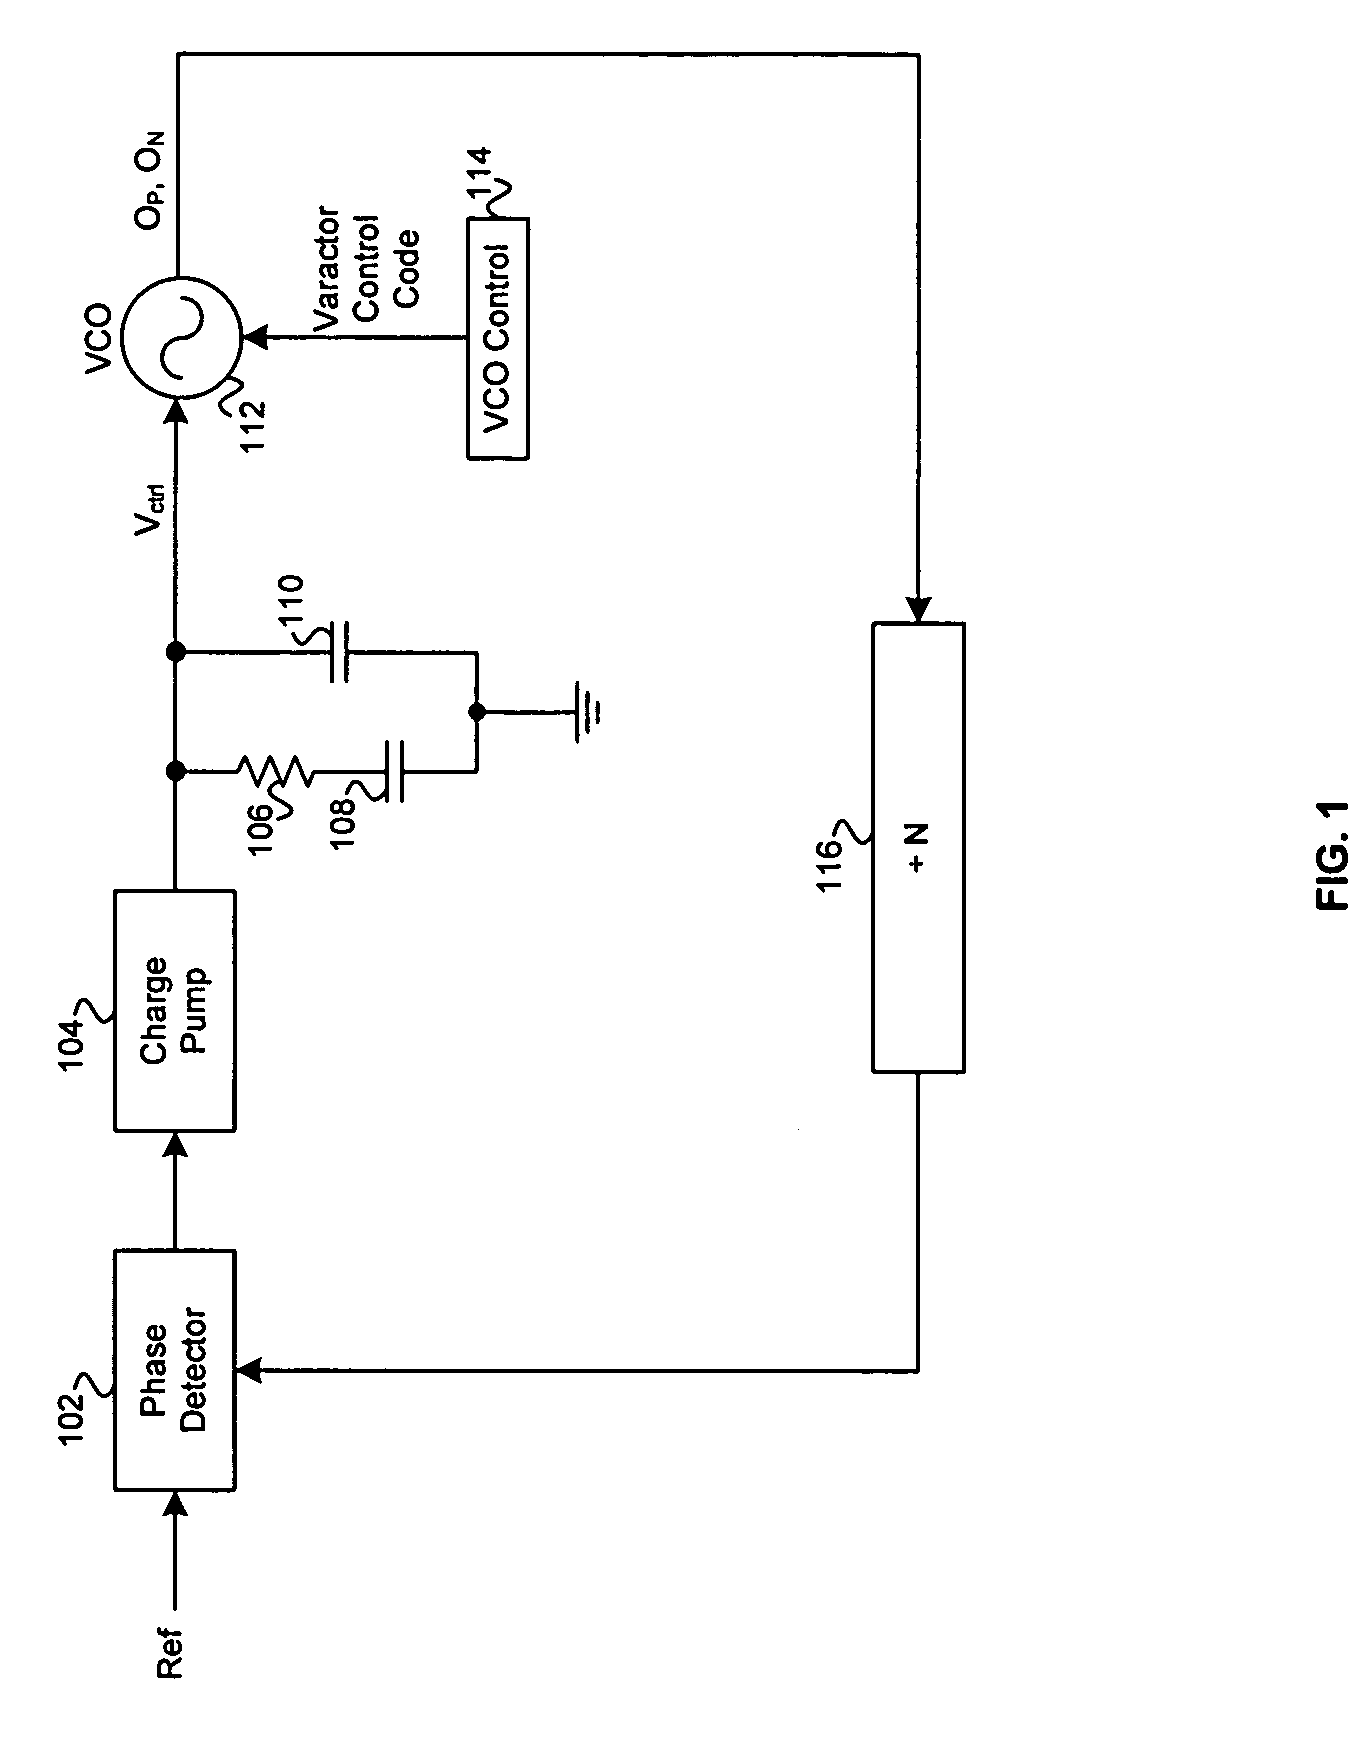 VCO with switchable varactor for low KVCO variation